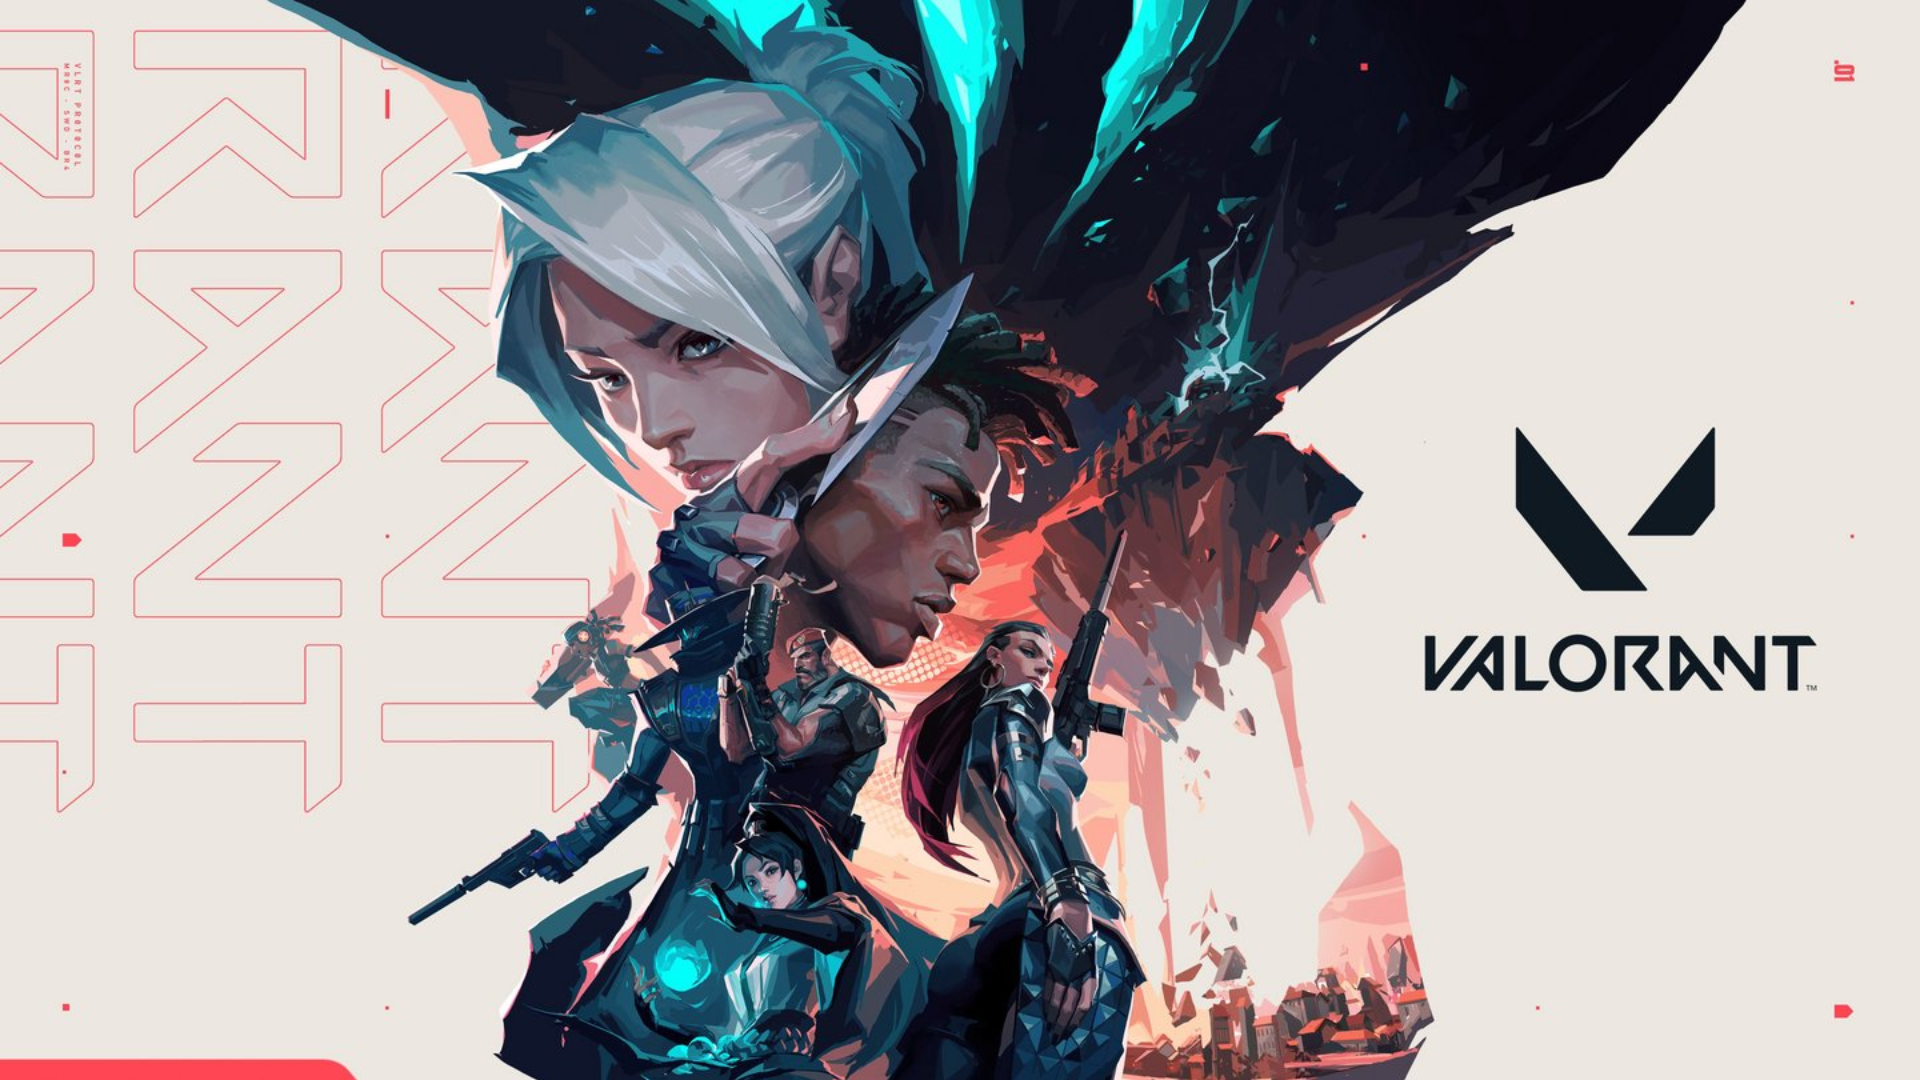 EE Game of the Year Award - Valorant